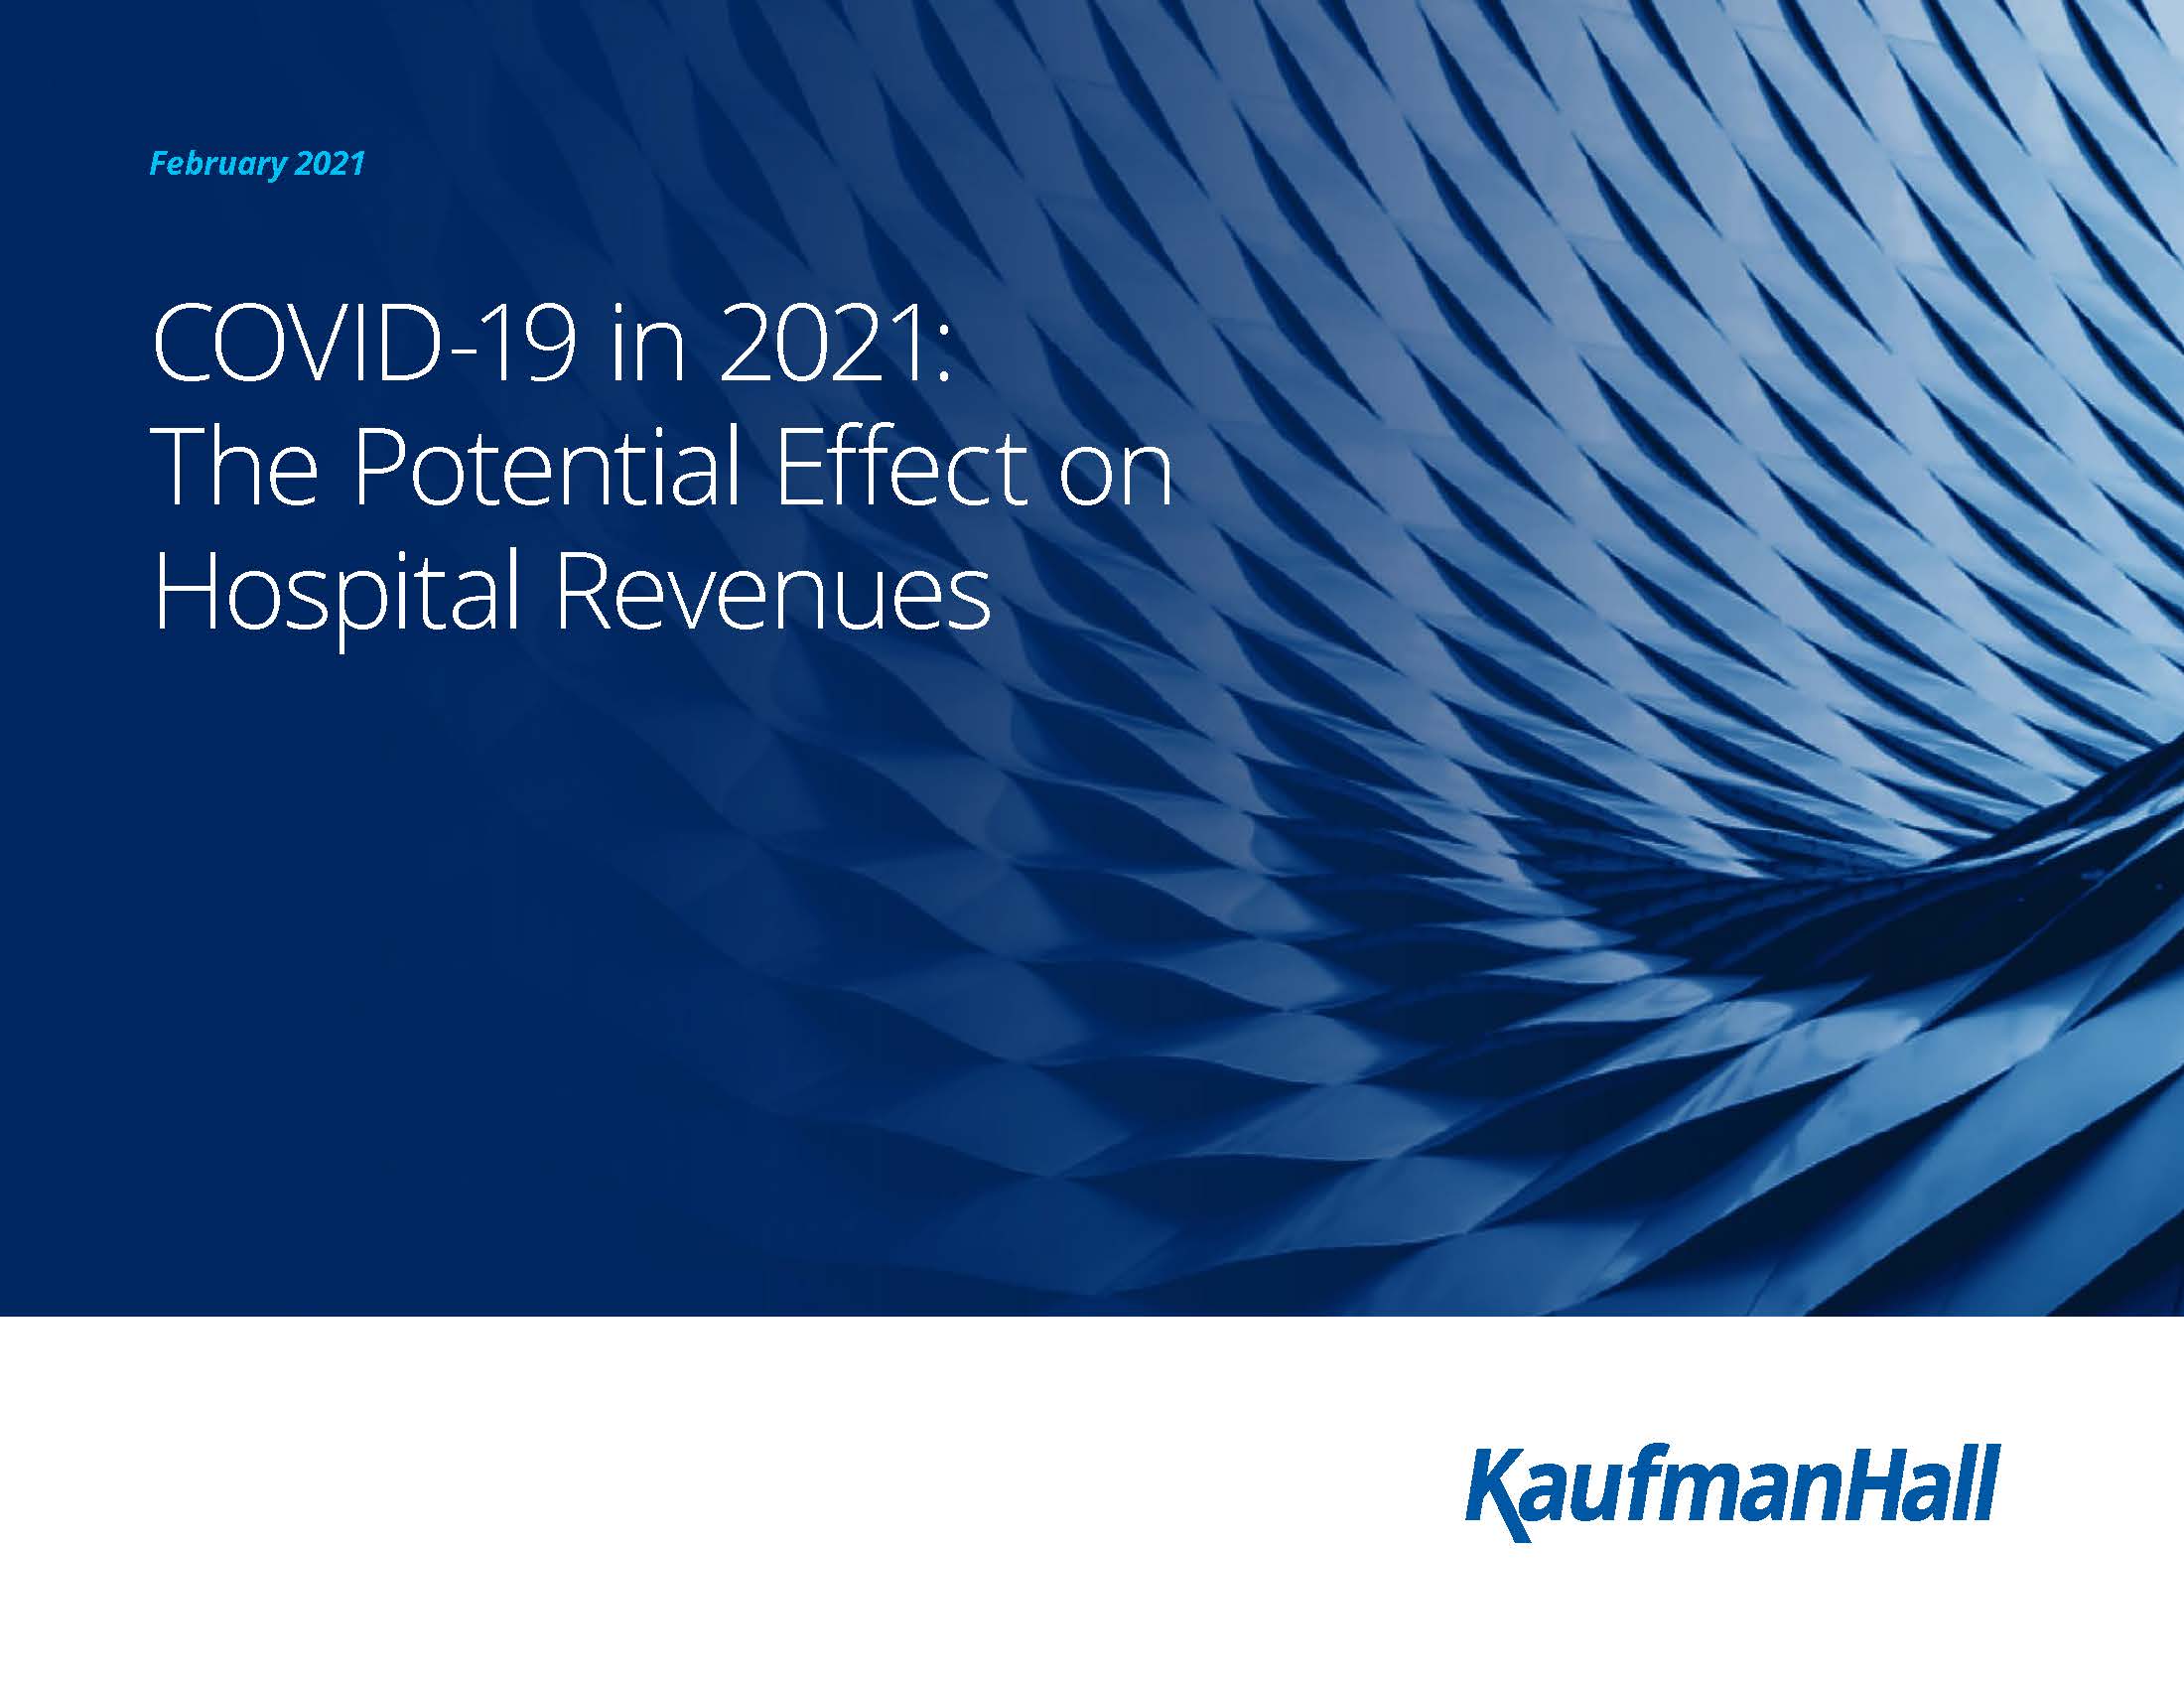 COVID-19 in 2021: The Potential Effect on Hospital Revenues cover. February 2021. KaufmanHall.